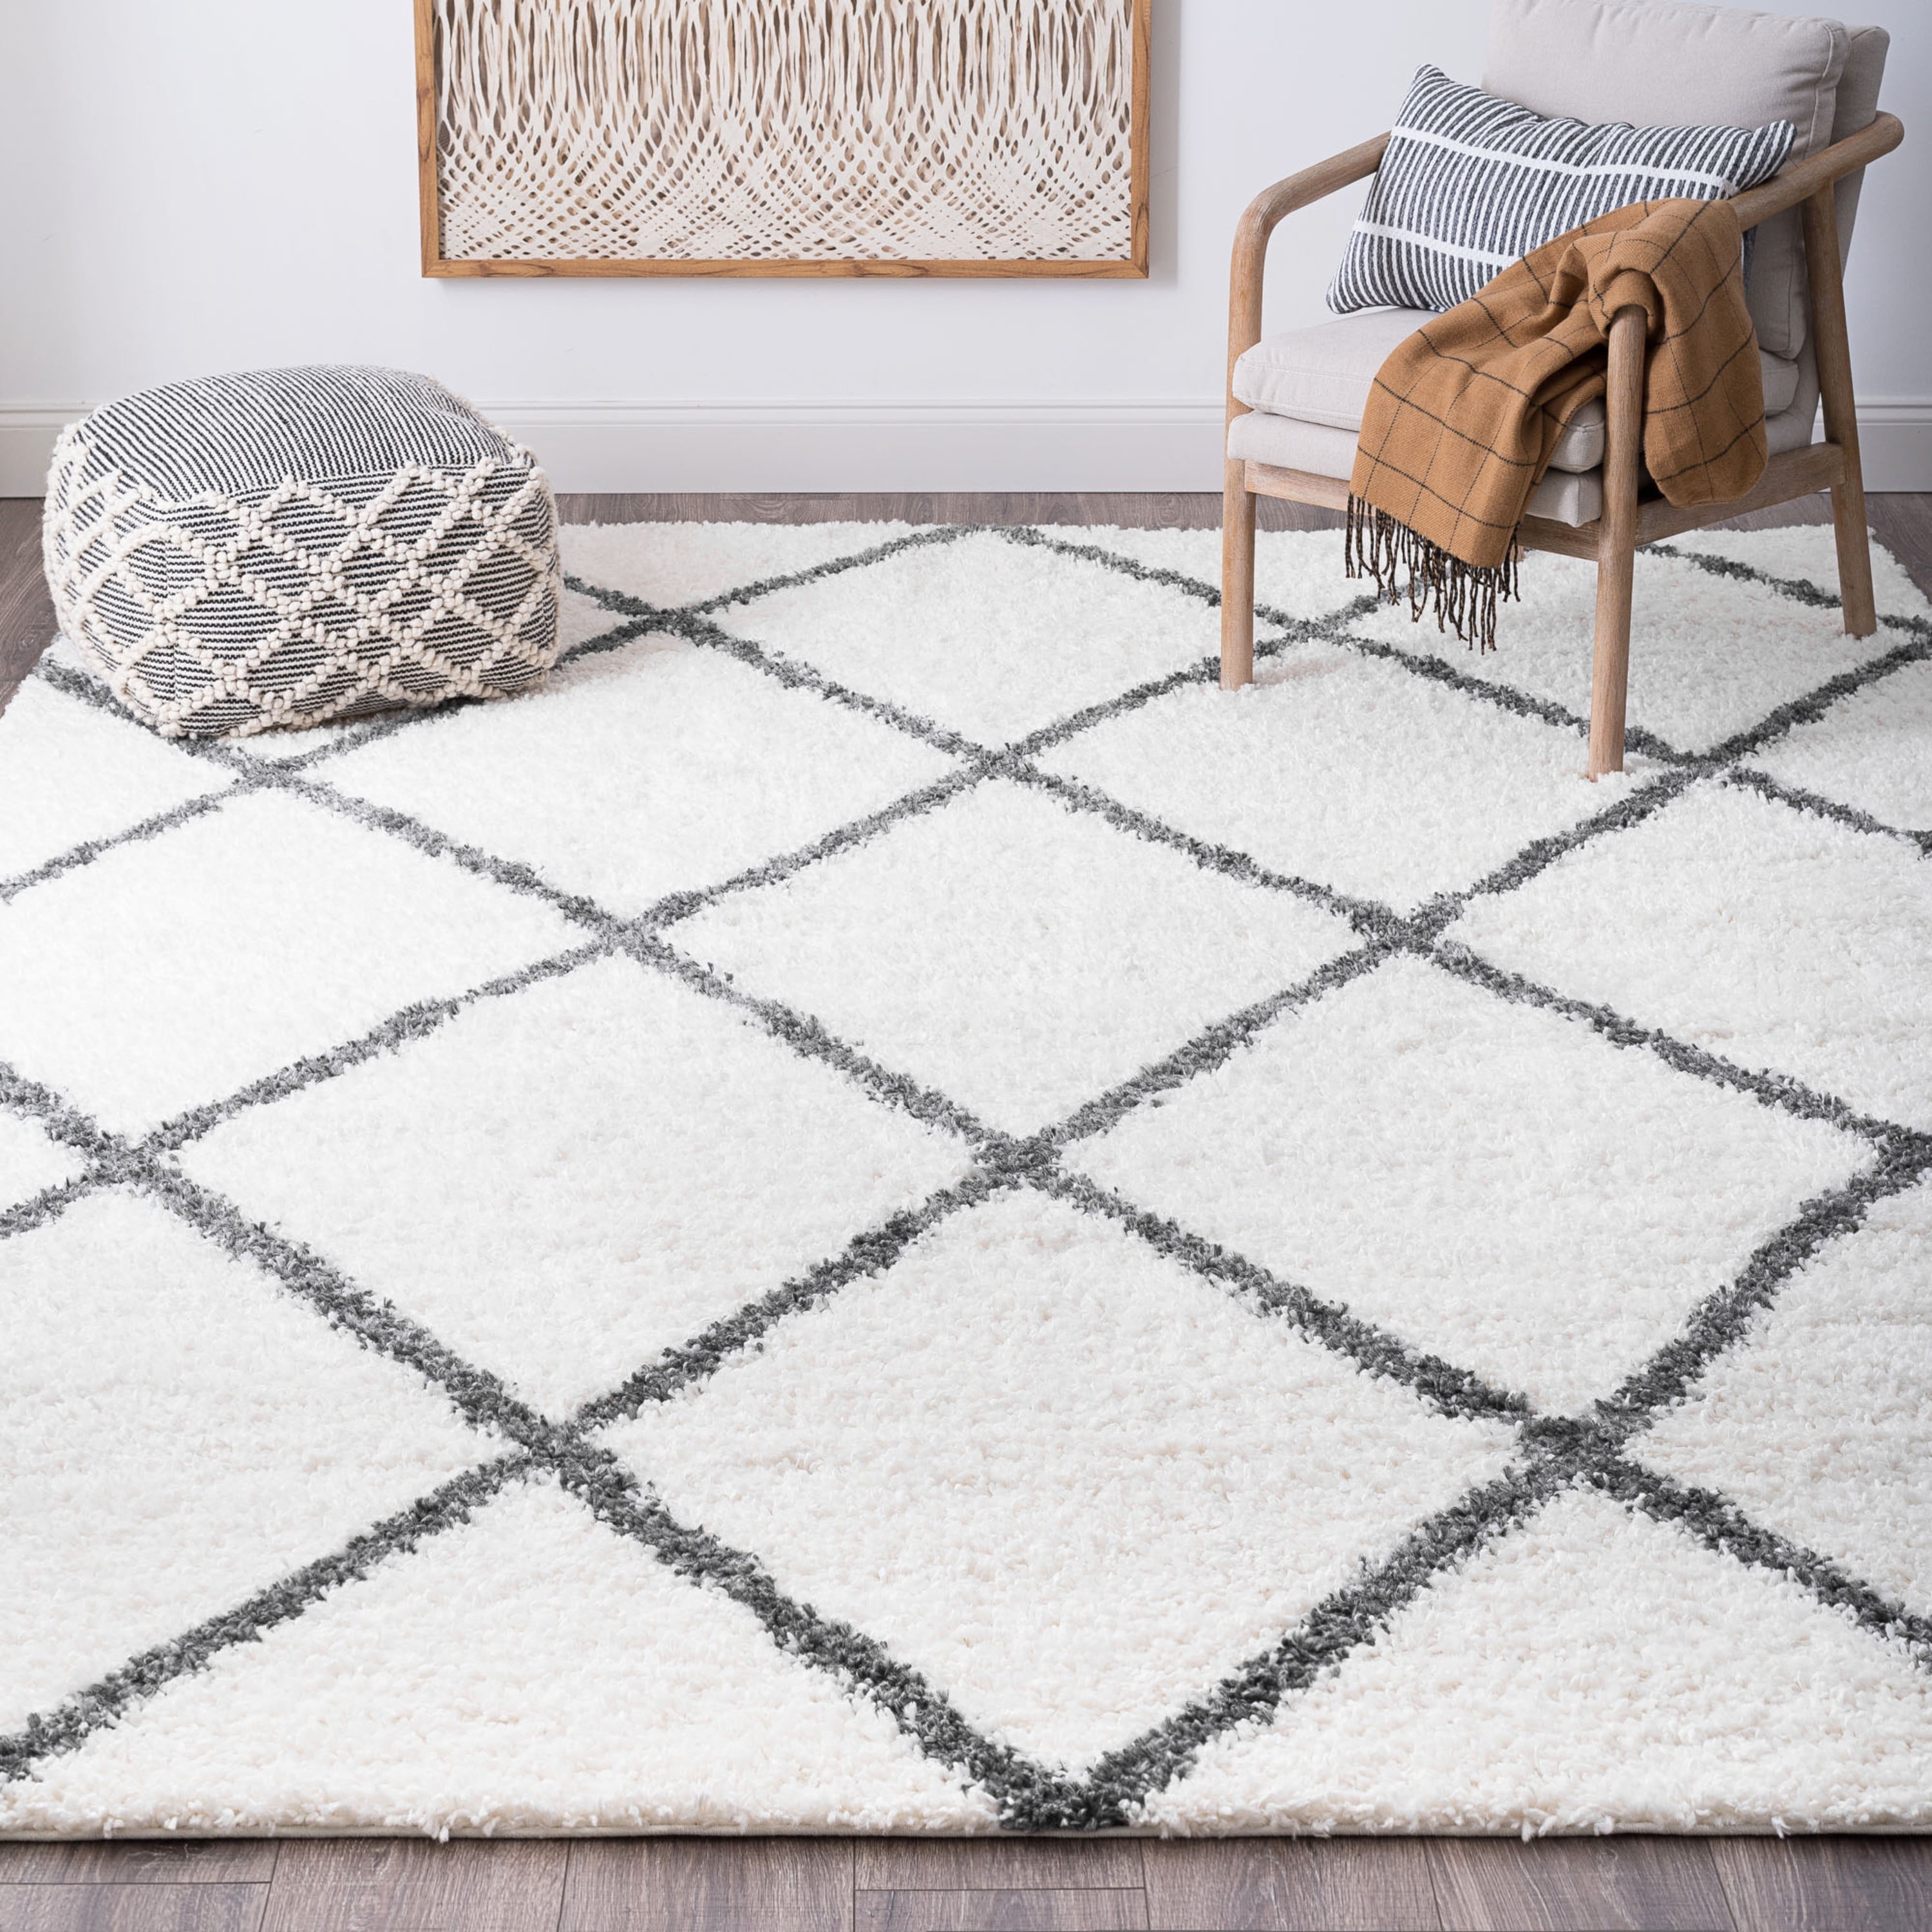 5x7 Modern White Area Rugs for Living Room | Bedroom Rug | Dining Room Rug | Indoor Entry or Entryway Rug | Kitchen Rug | Alfombras para Salas 5'3'' x 7'3'' -New in Box